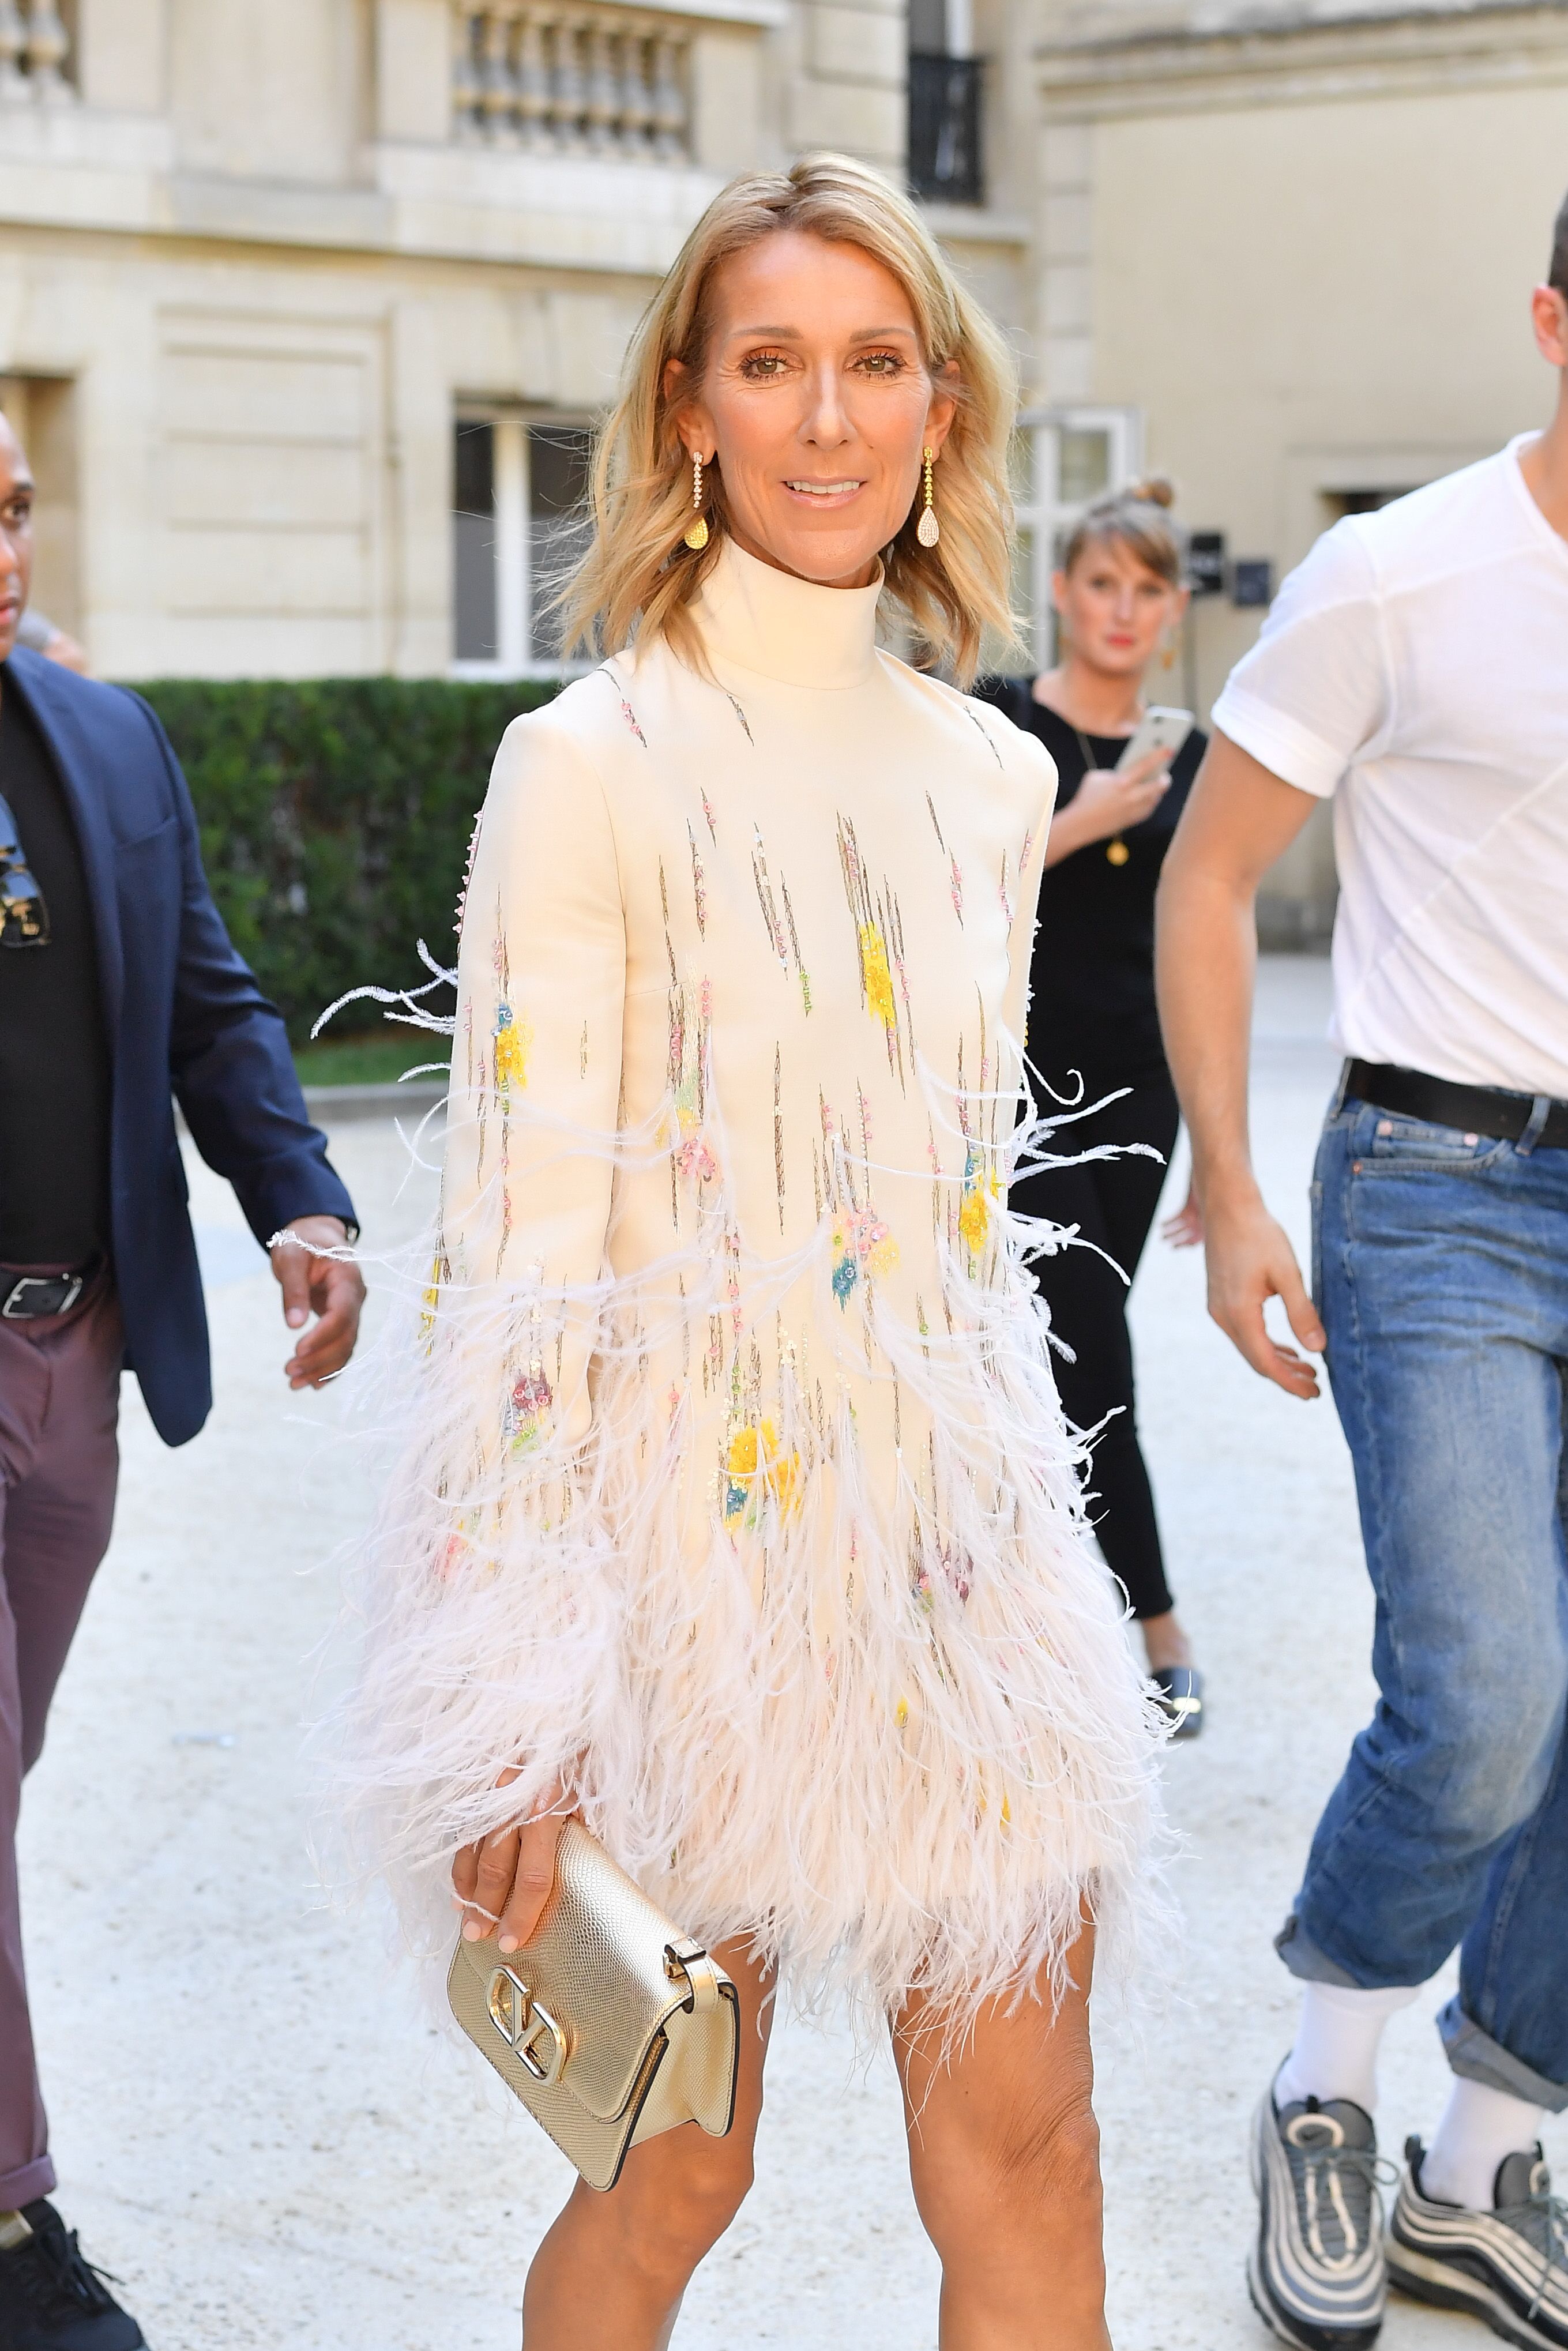 Celine Dion attends the Valentino Haute Couture Fall/Winter 2019 2020 show as part of Paris Fashion Week on July 03, 2019 in Paris, France. | Source: Getty Images